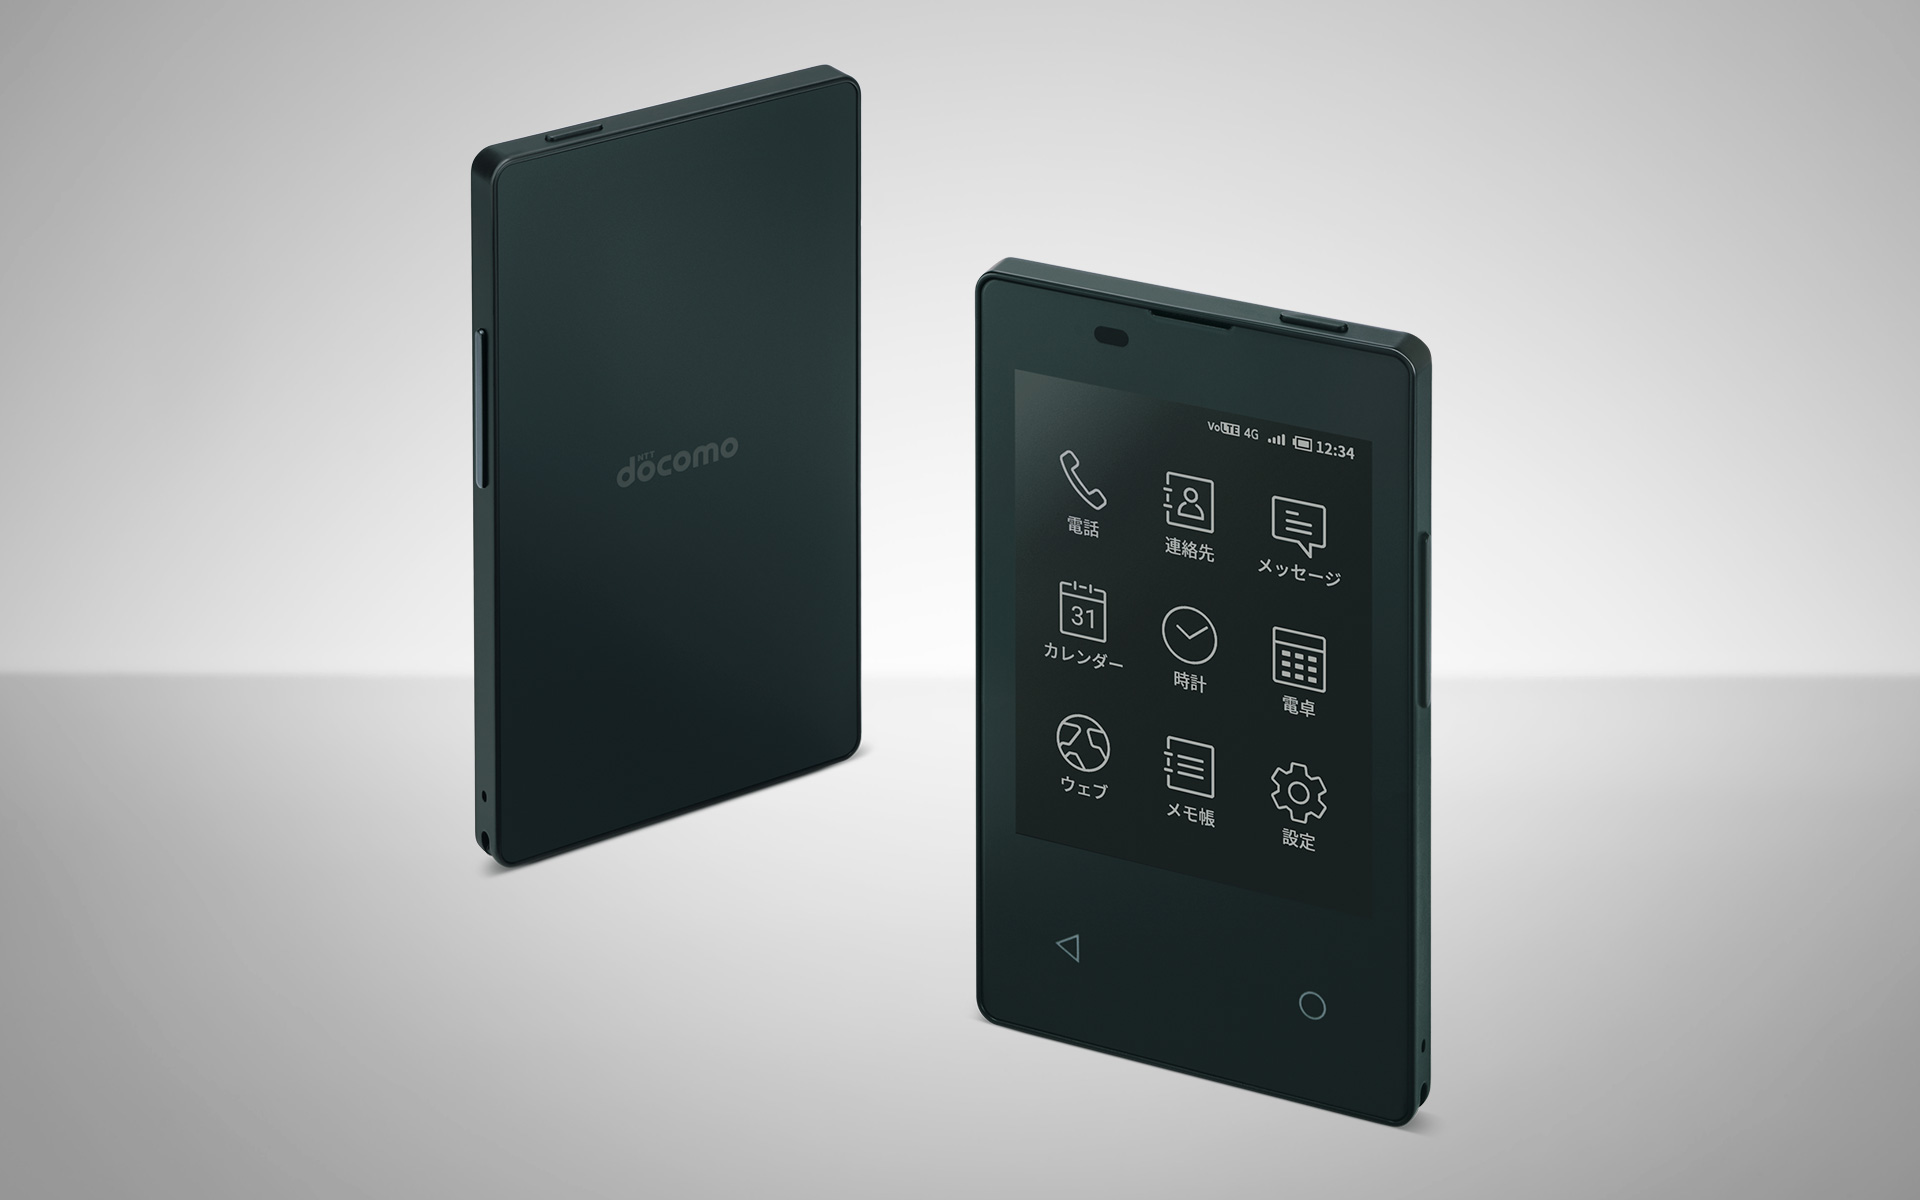 world"s thinnest phone fits in a card holder